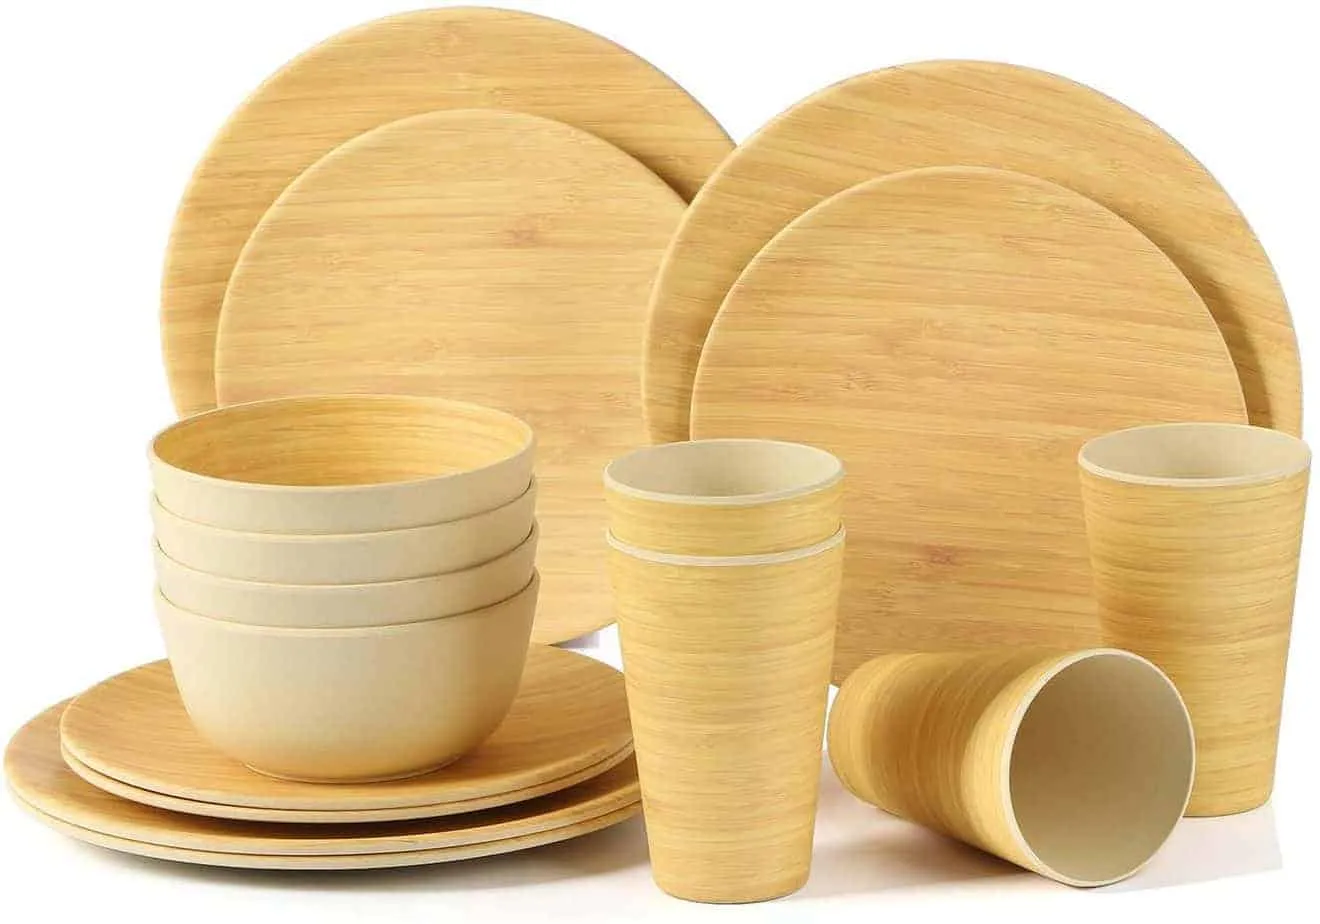 Woodworking with Bamboo: Sustainable and Versatile Material